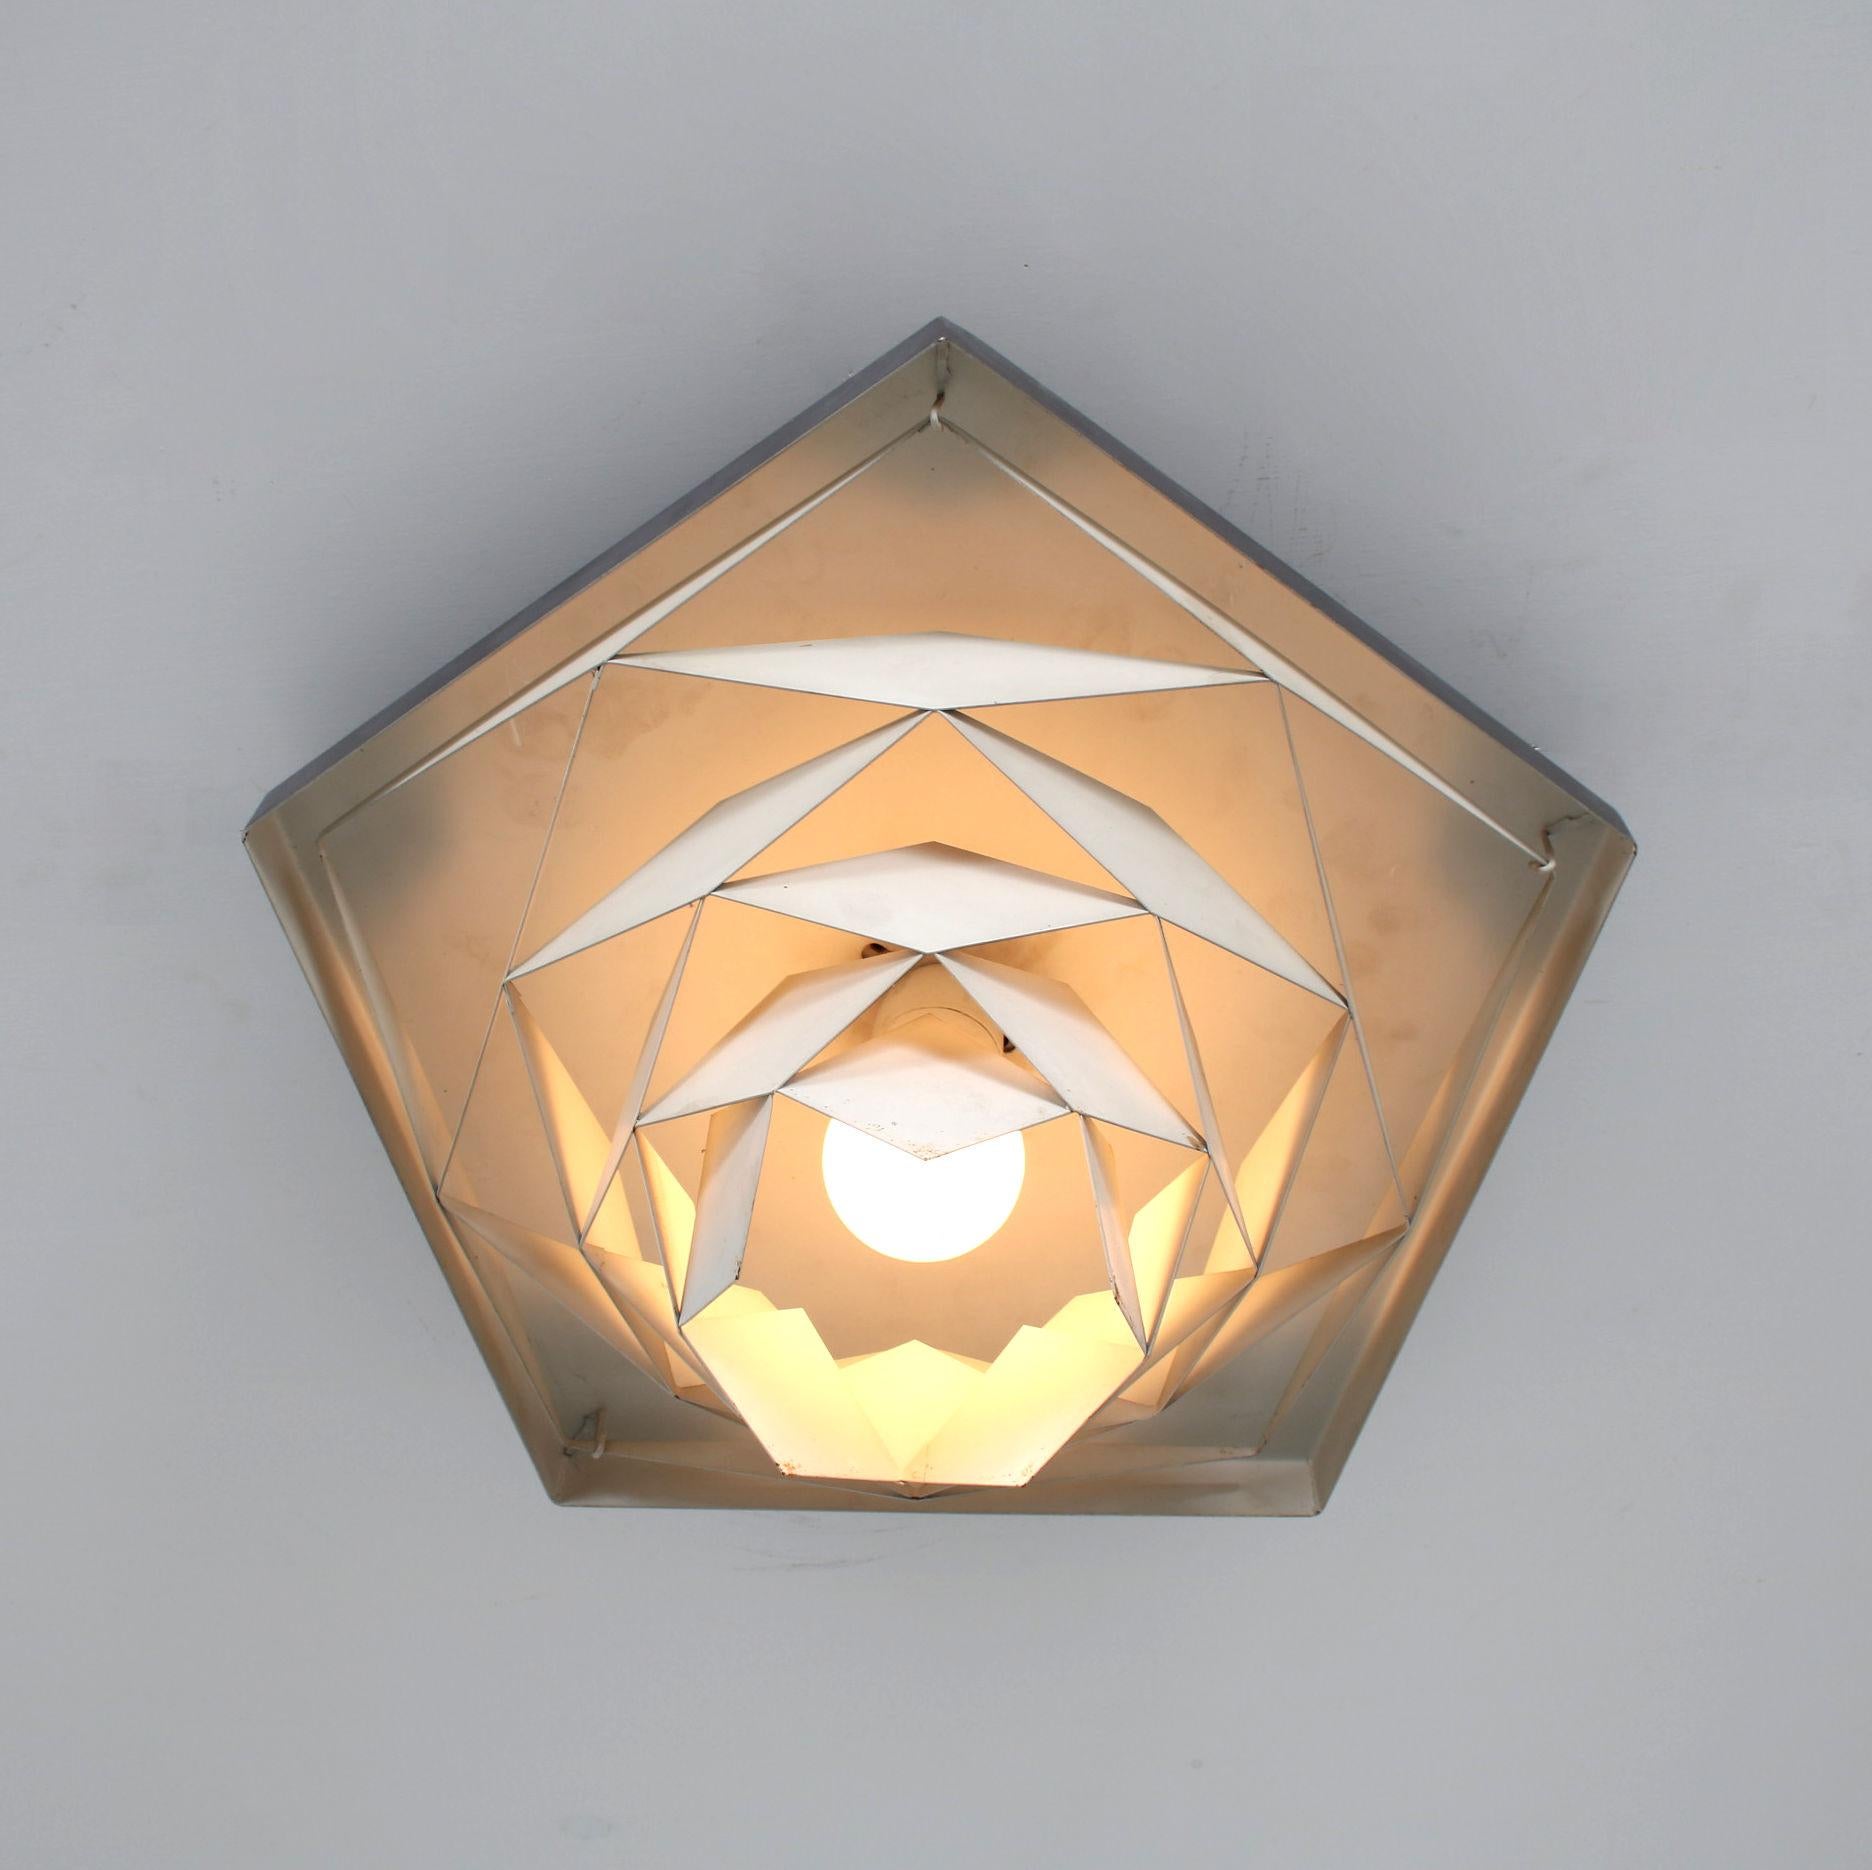 

A beautiful ceiling lamp designed by Preben Dahl and manufactured by Hans Folsgaard in Denmark around 1960.

Part of the “Sympfoni” series designed by Dahl. Pieces of these series can all be recognized by there resembling structure and materials.